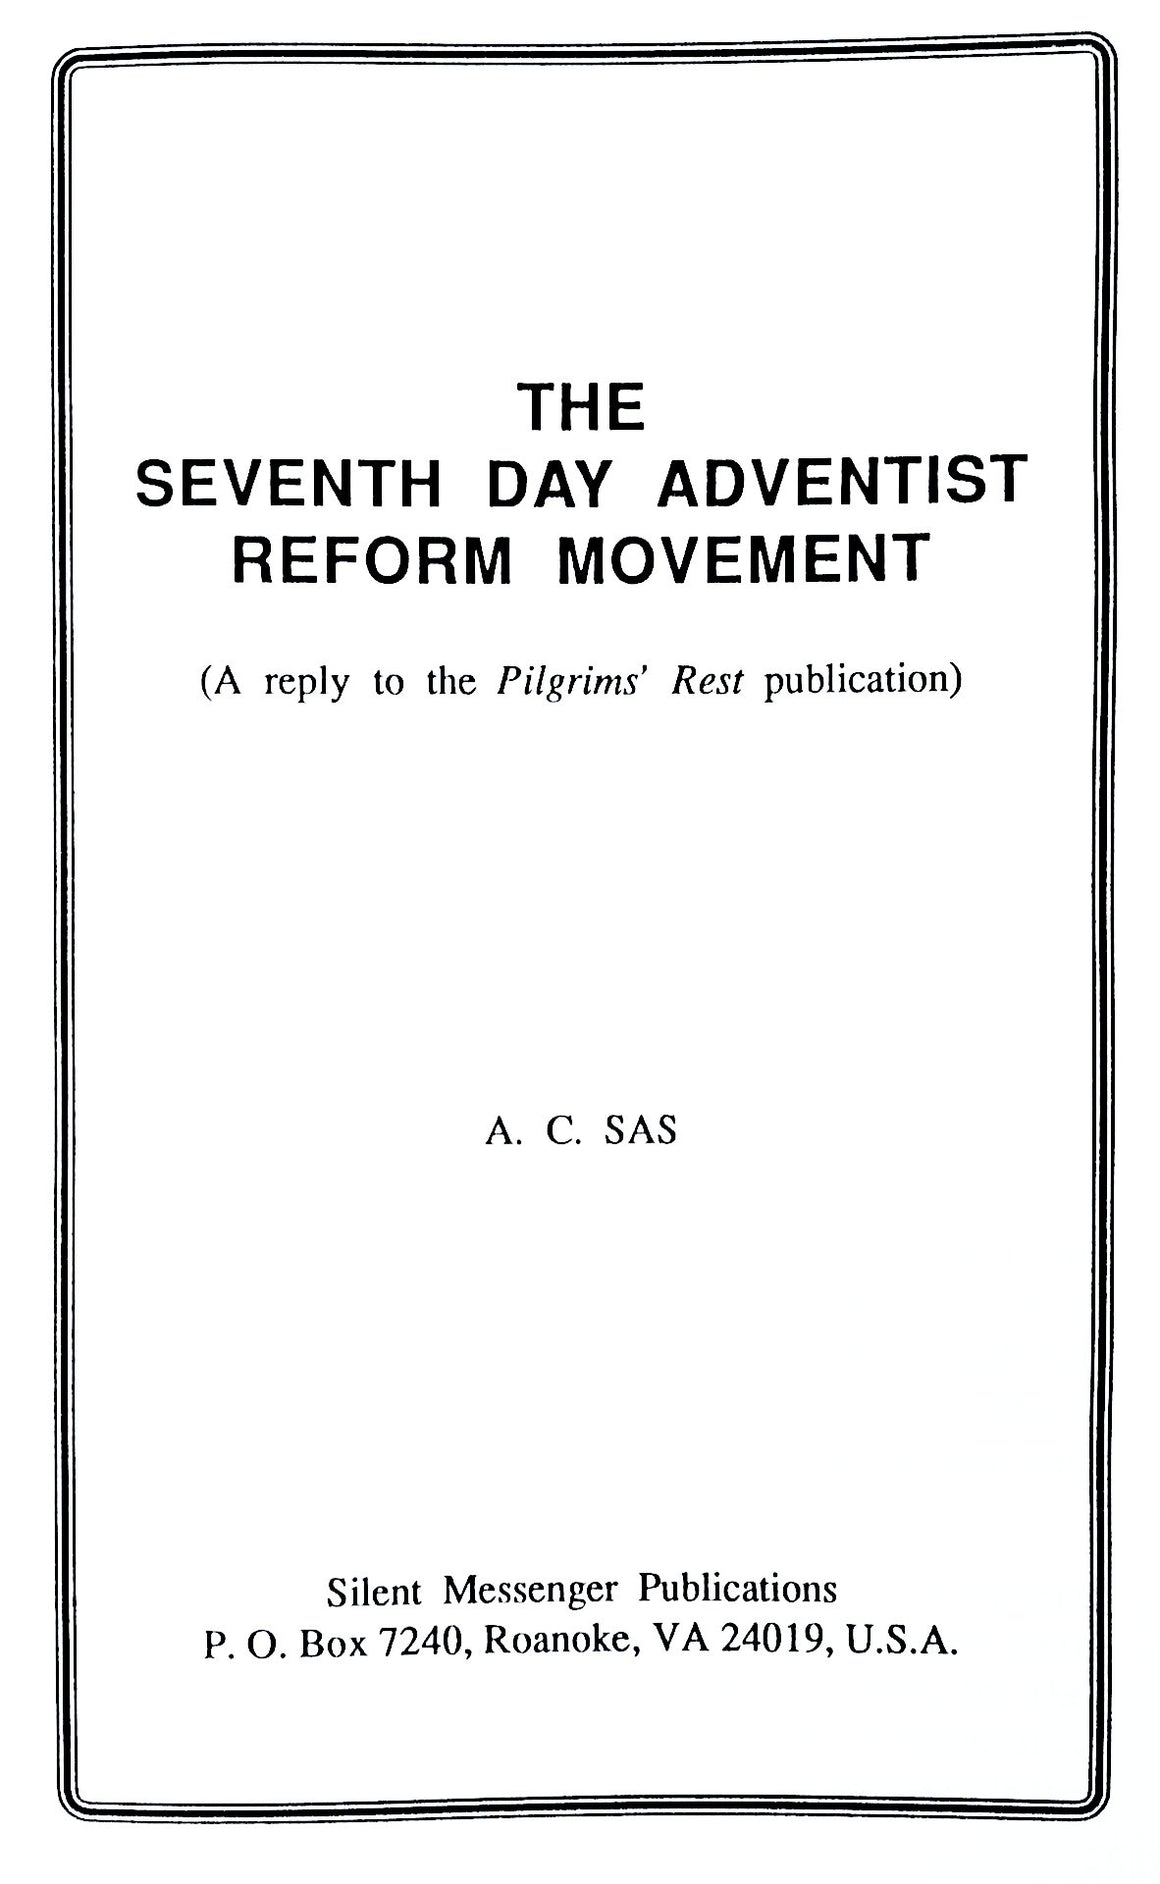 The Seventh Day Adventist Reform Movement—Reply to the Pilgrim's Rest Publication